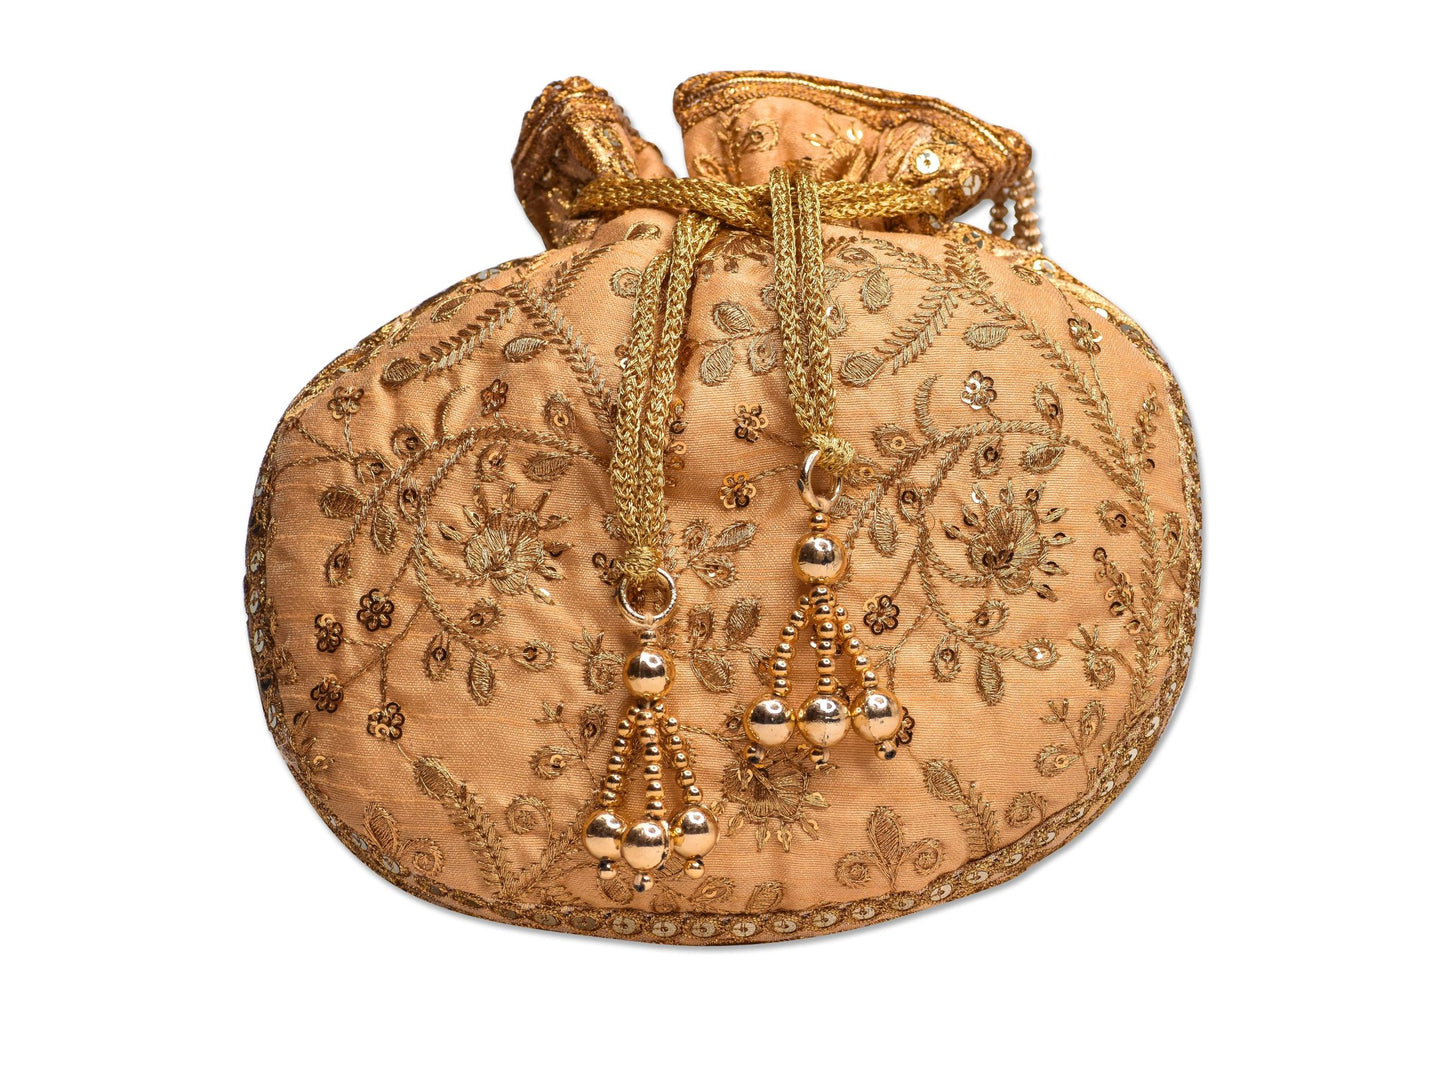 Raw Silk Bag With Zari Embroidery Online in India